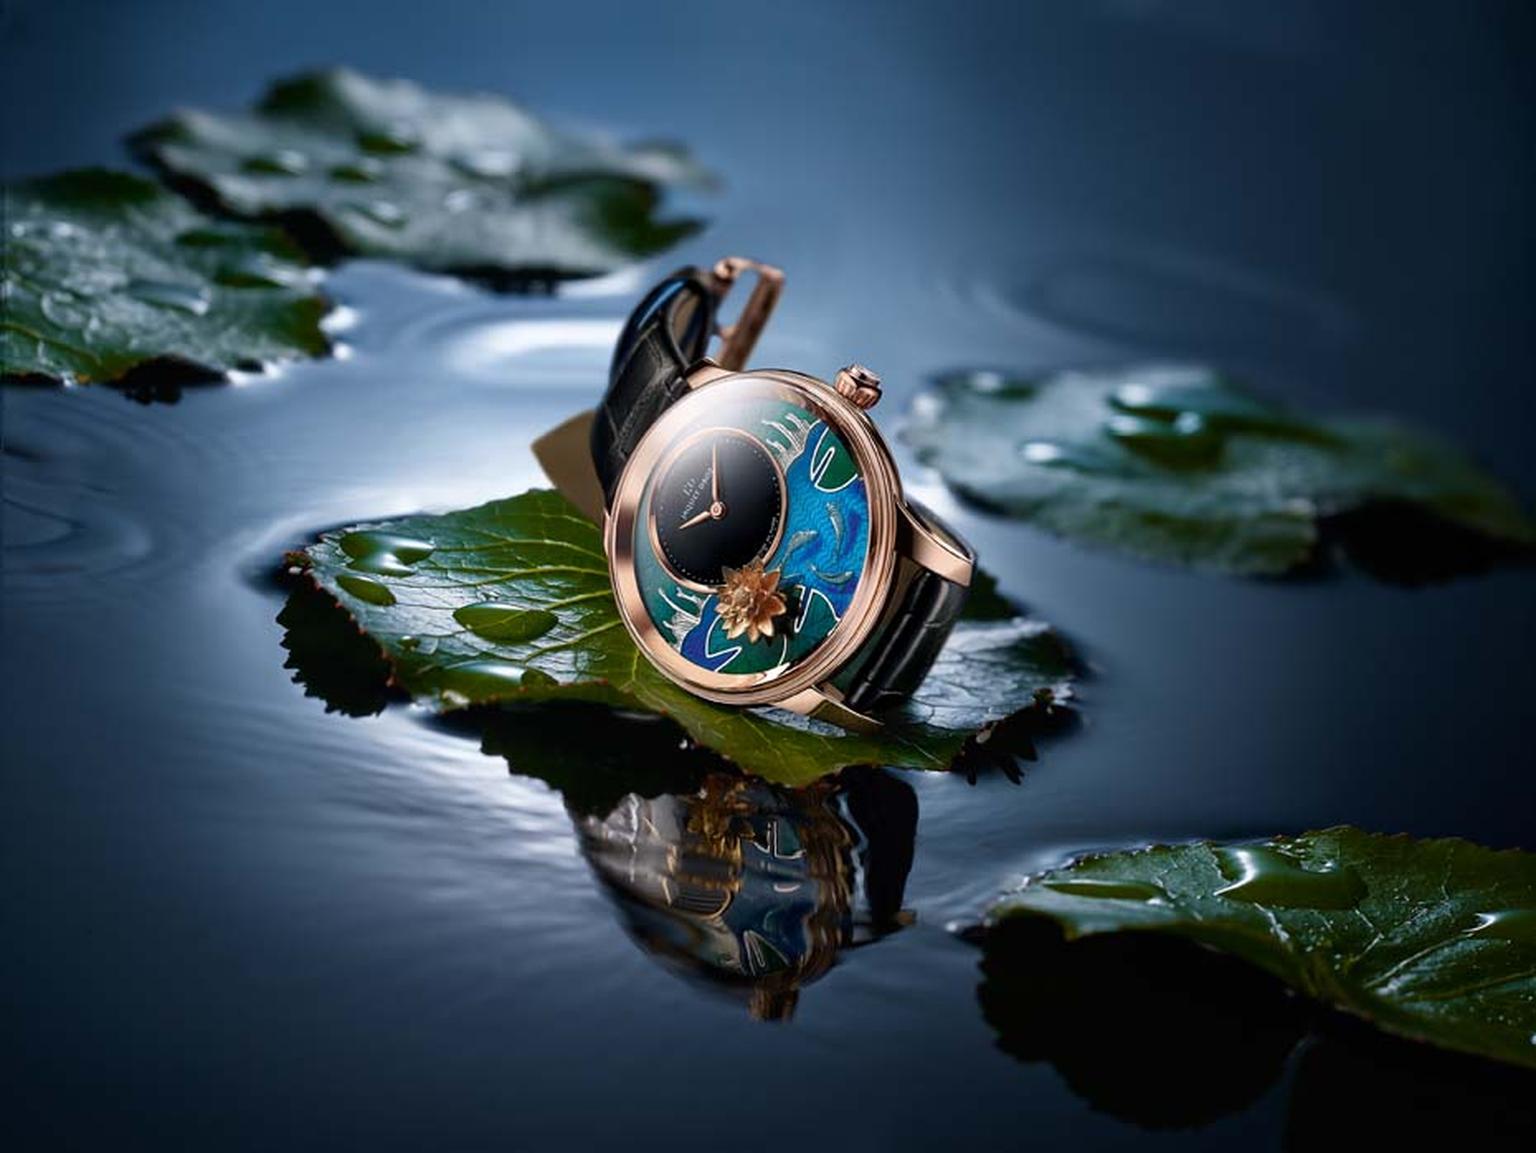 Fish watches_Jaquet Droz_Petite heure minute carps ambiance.jpg